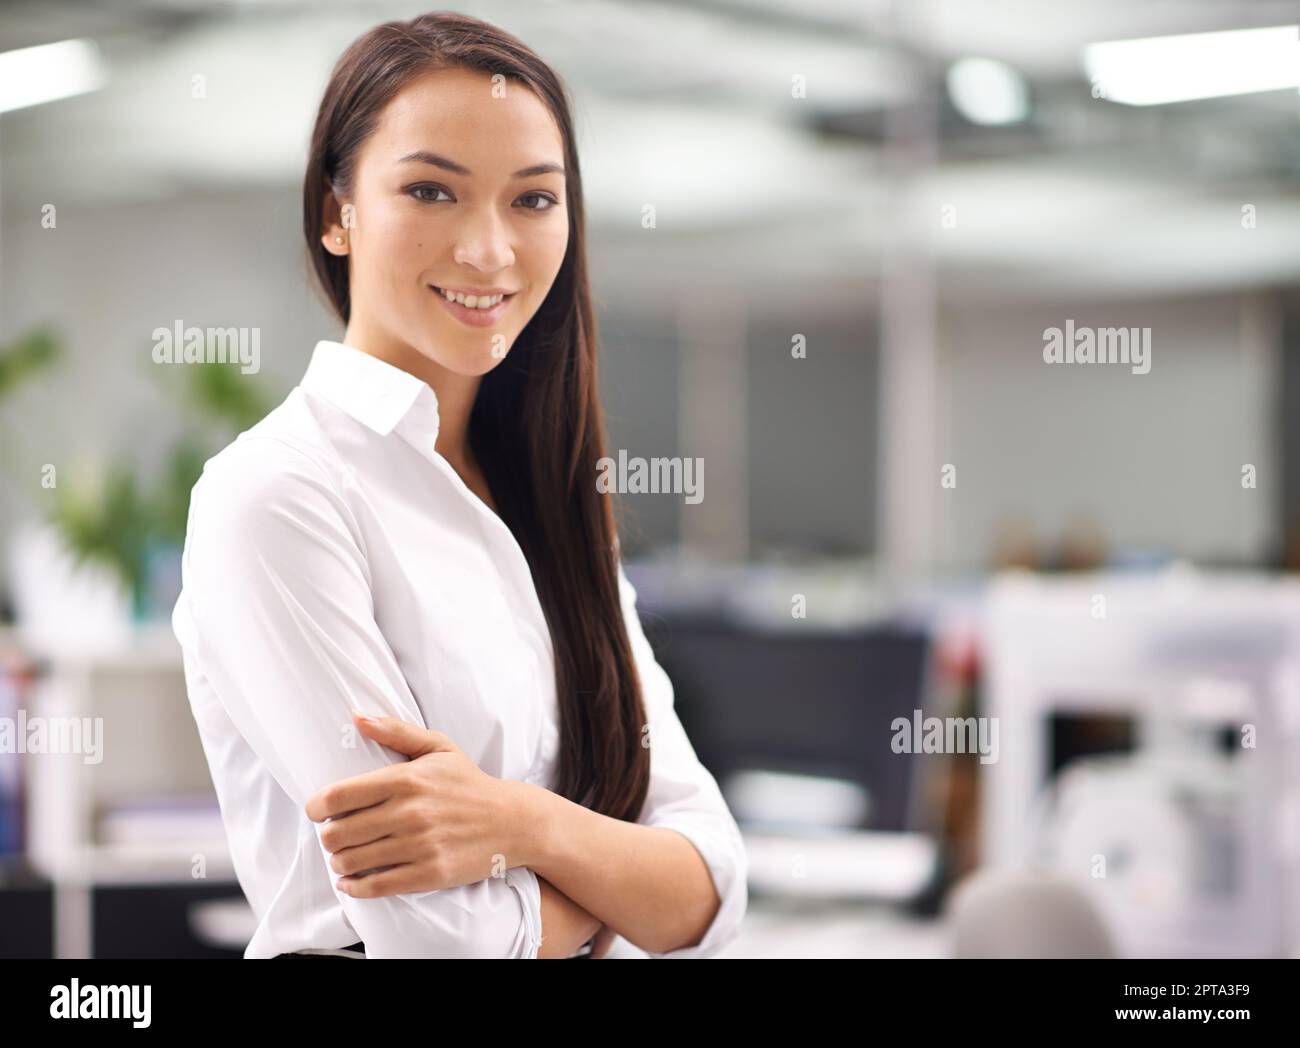 Theres no misplaced confidence here. Portrait of an attractive young businesswoman standing with her arms folded in the office Stock Photo